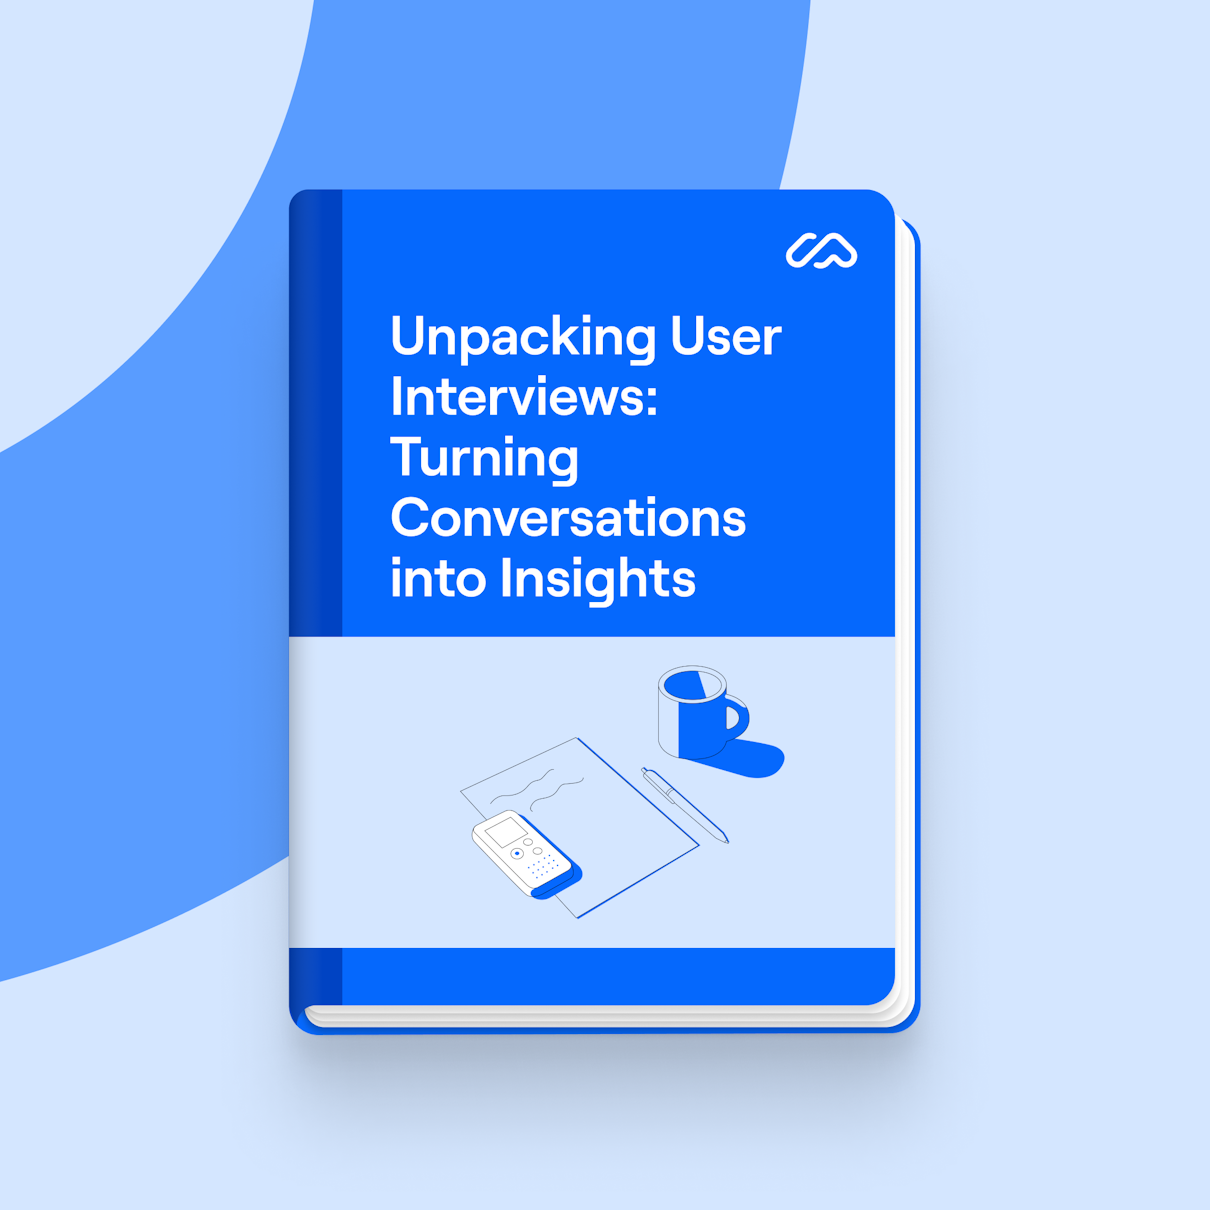 Unpacking User Interviews: Turning Conversations into Insights